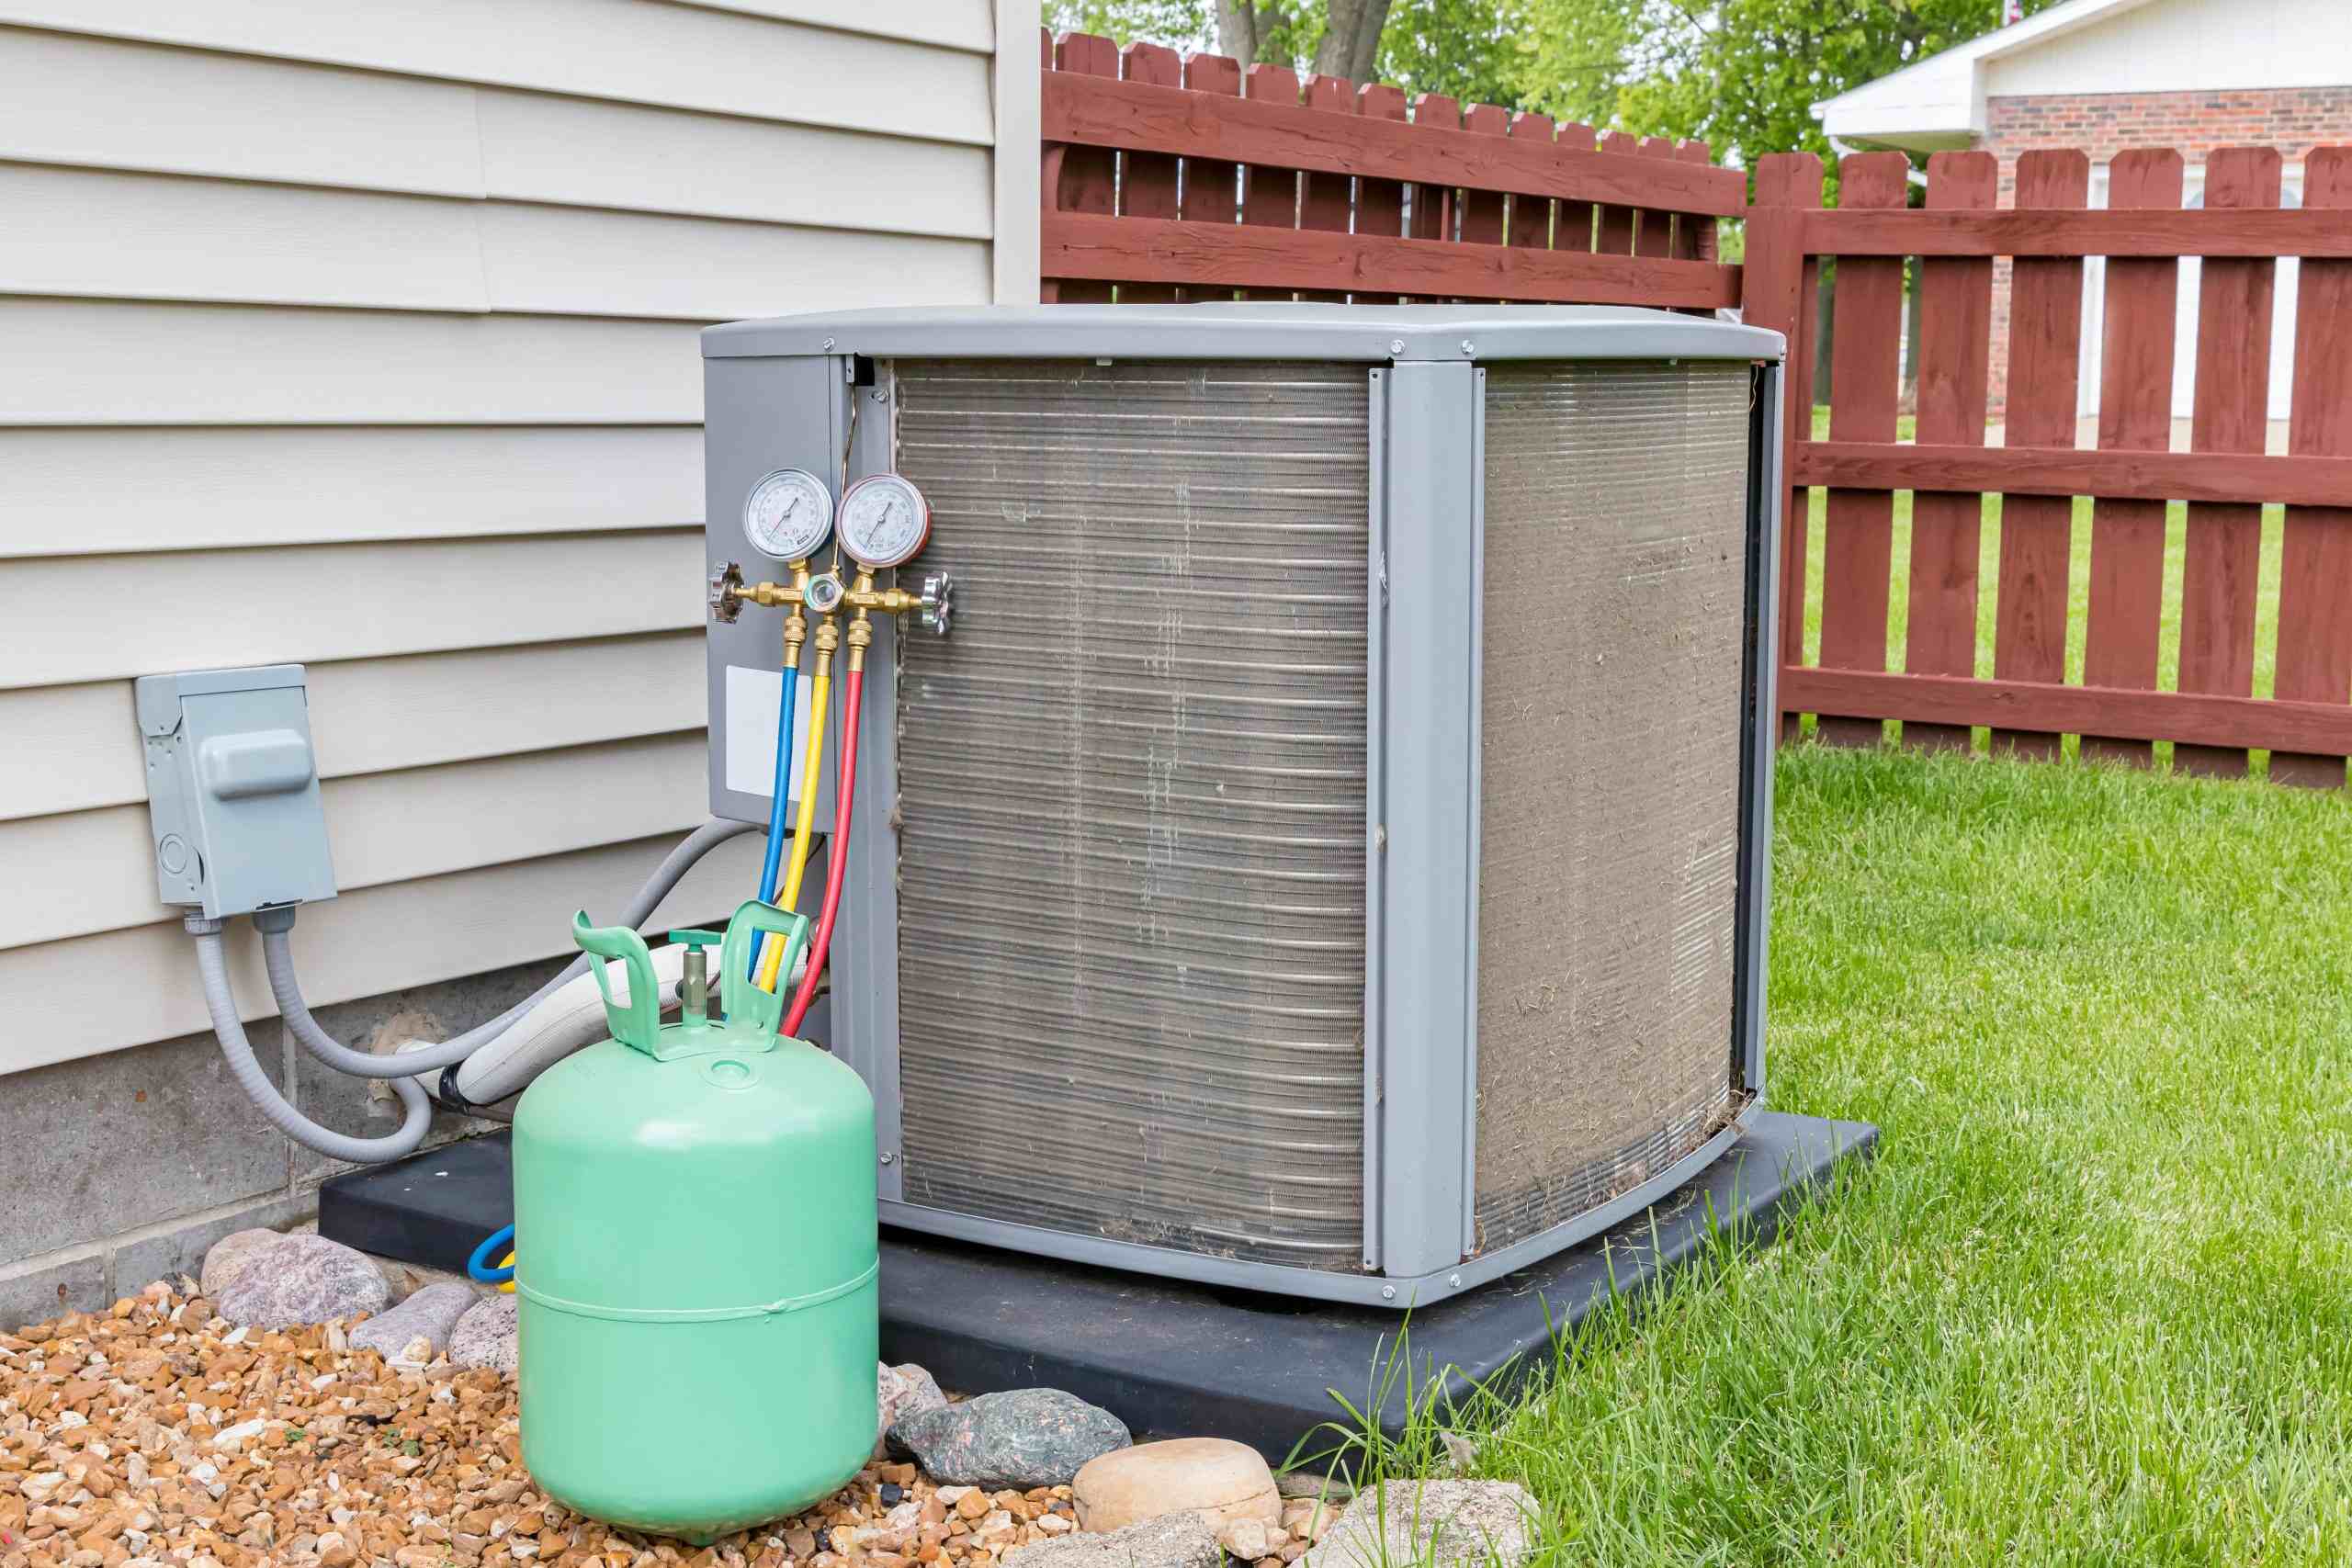 How To Add Freon To Home Air Conditioning Unit